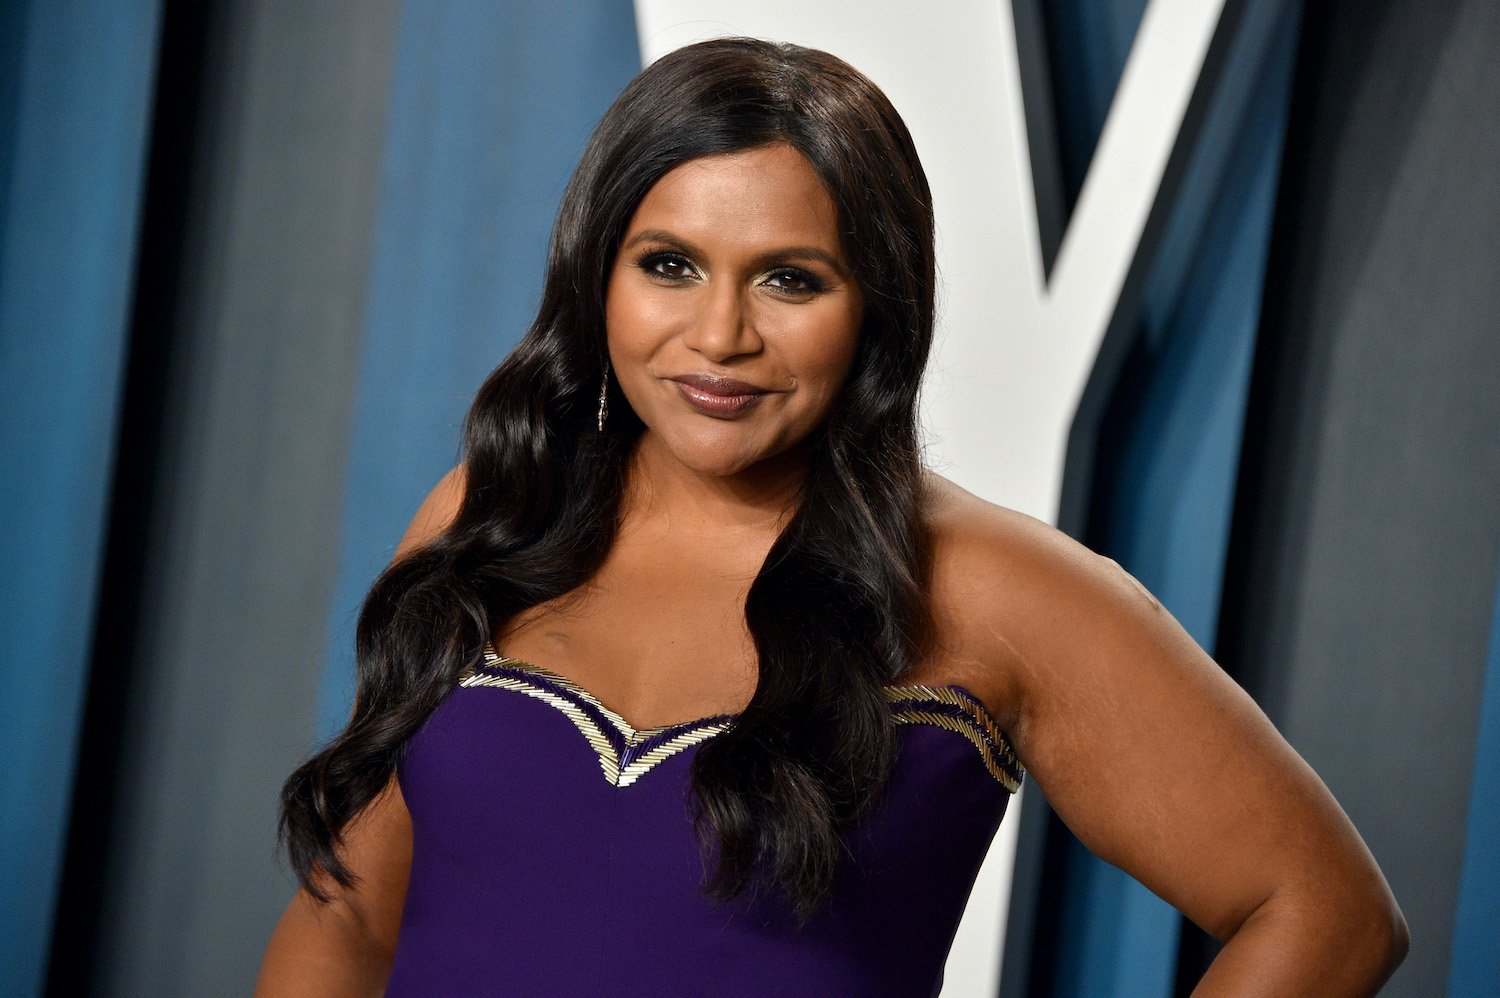 Mindy Kaling attends the 2020 Vanity Fair Oscar Party